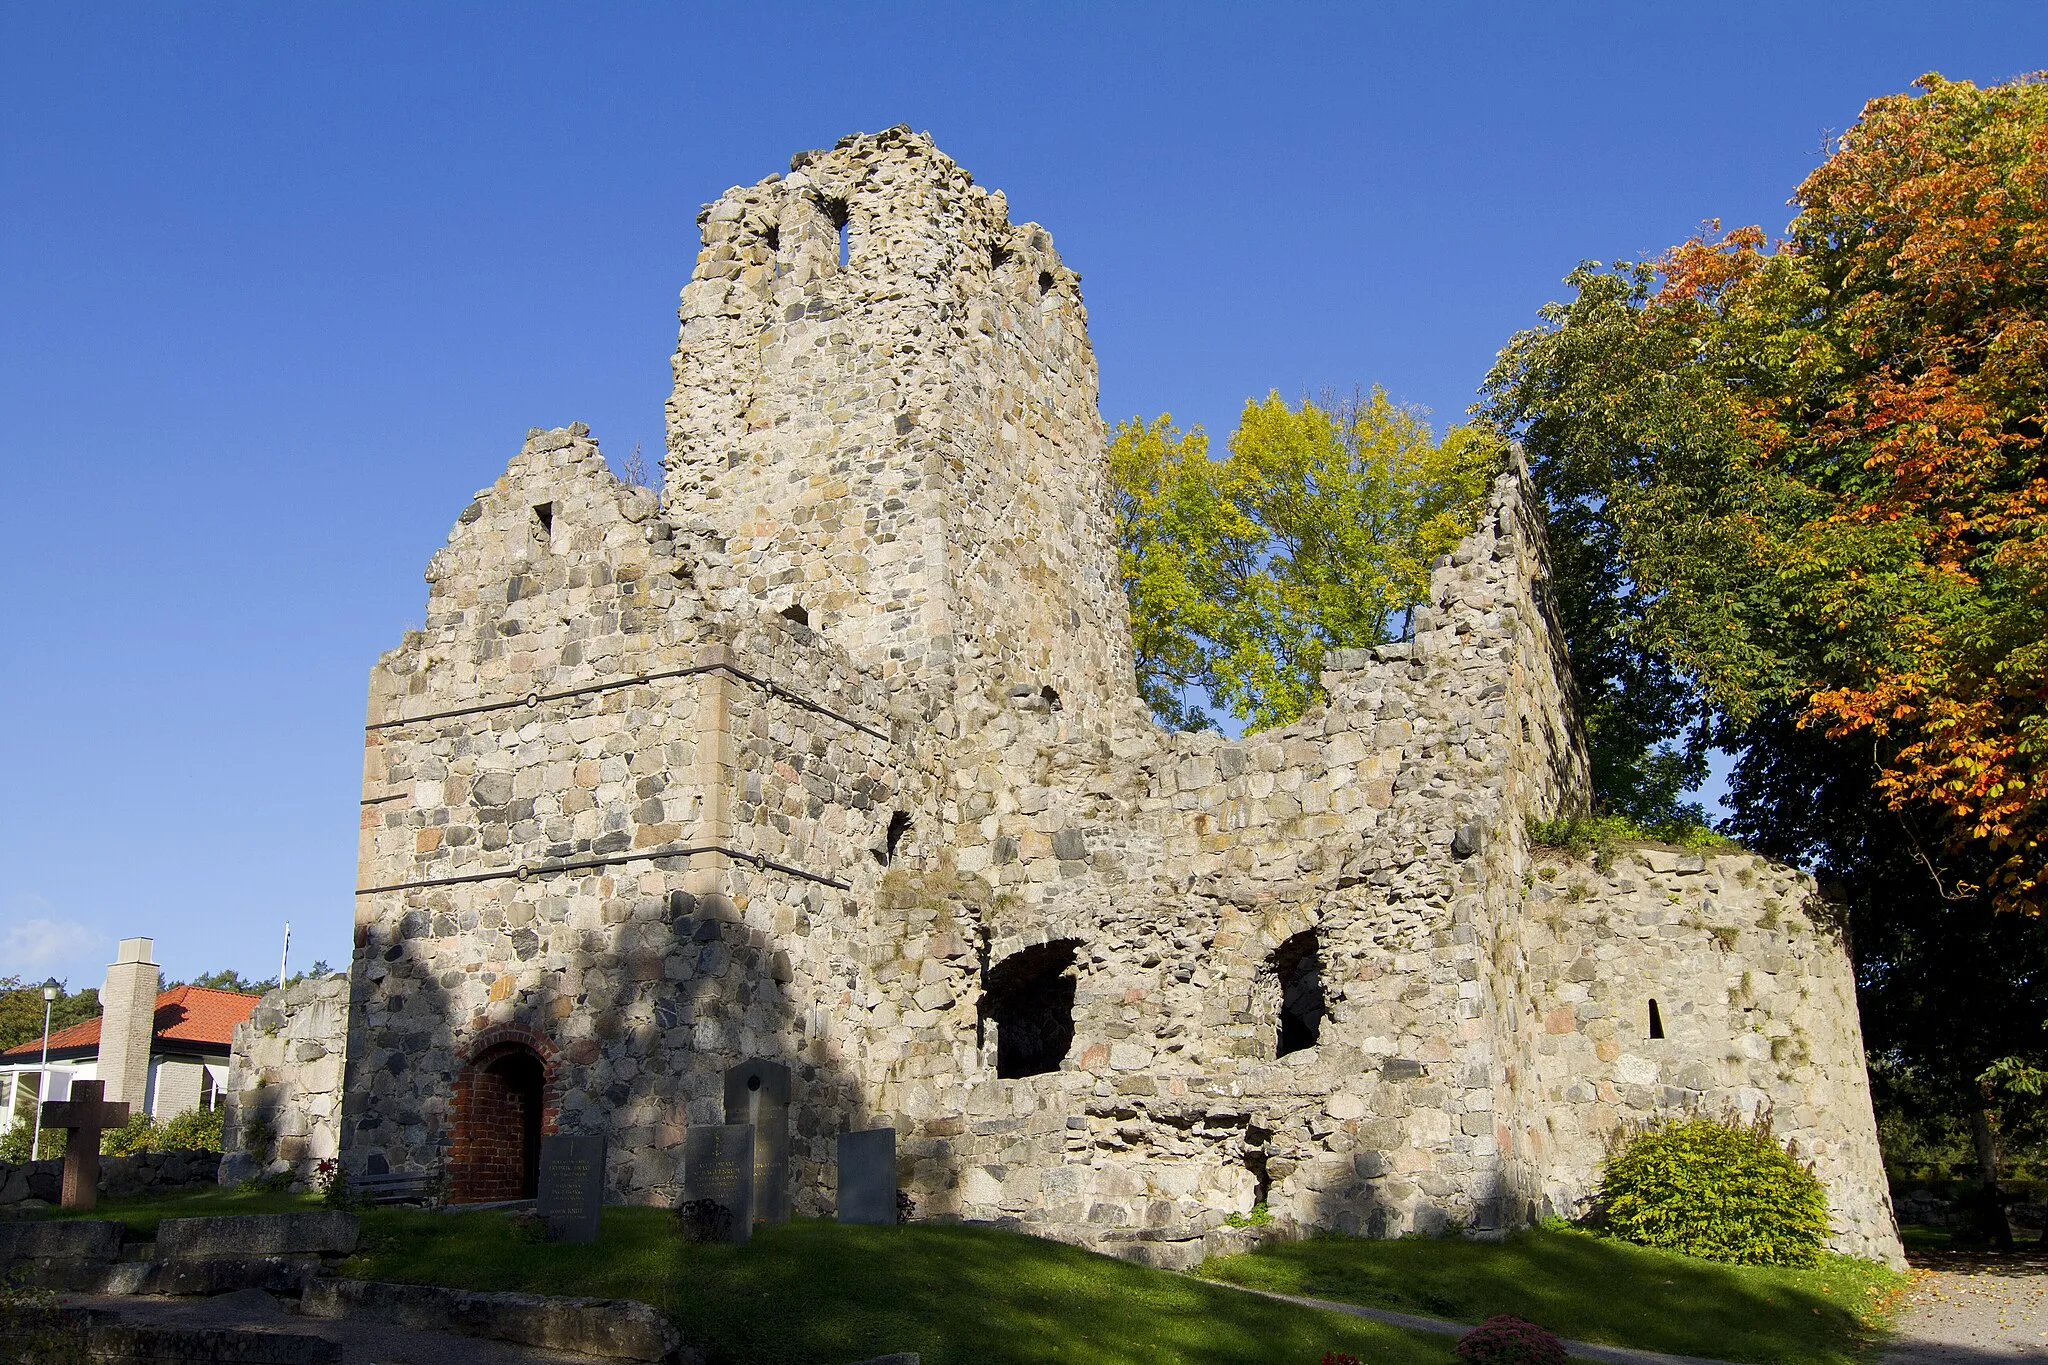 Photo showing: The ruins of St. Olofs Church in Sigtuna, Sweden dating back to the 12th century.